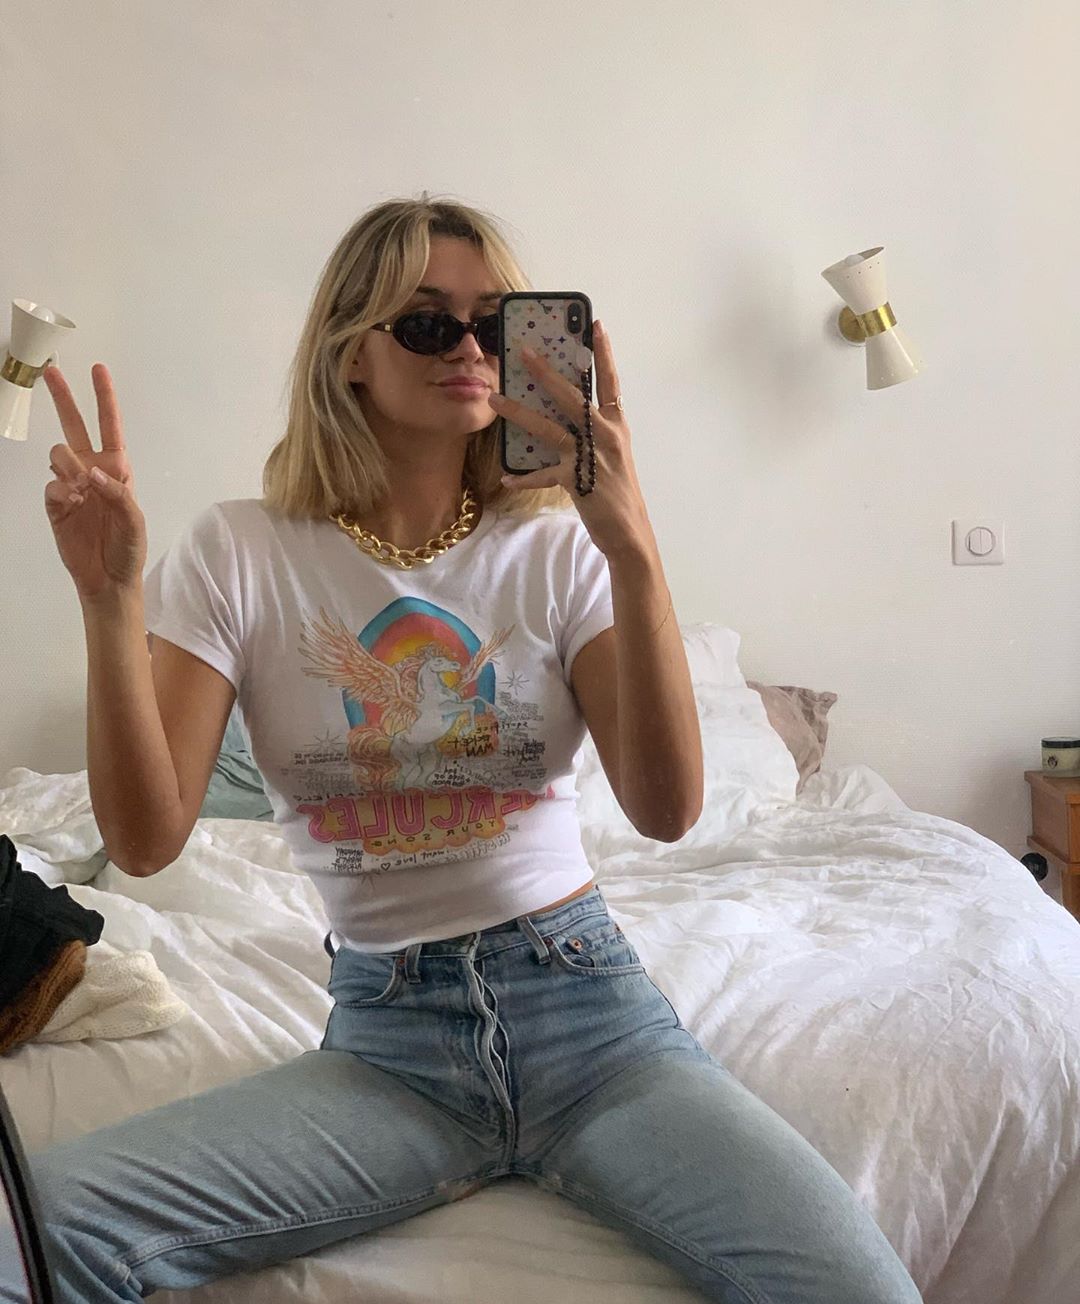 The 9 Best Graphic Tees Fashion Girls Love | Who What Wear